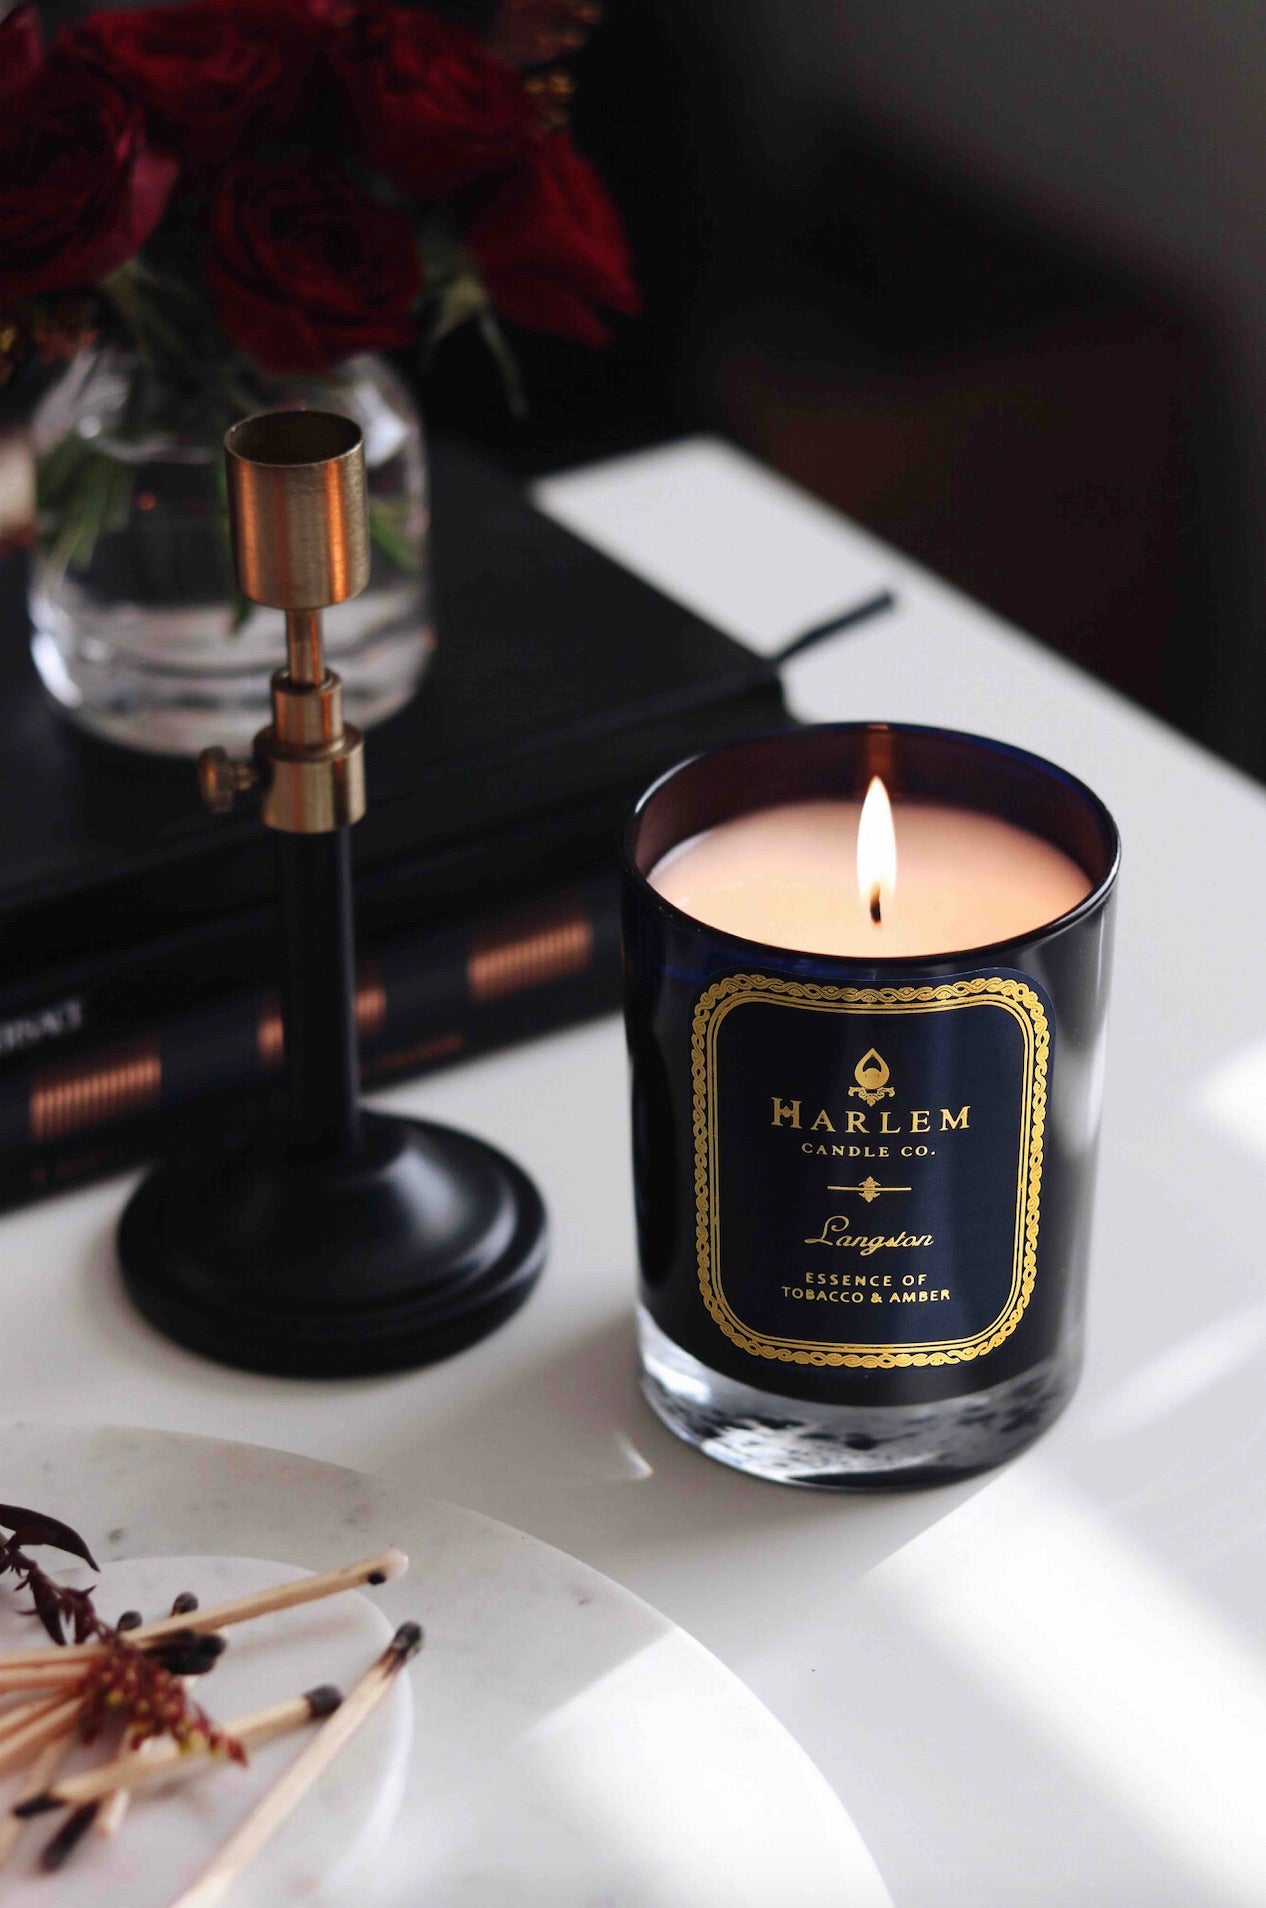 "Langston" luxury candle - 1 wick version